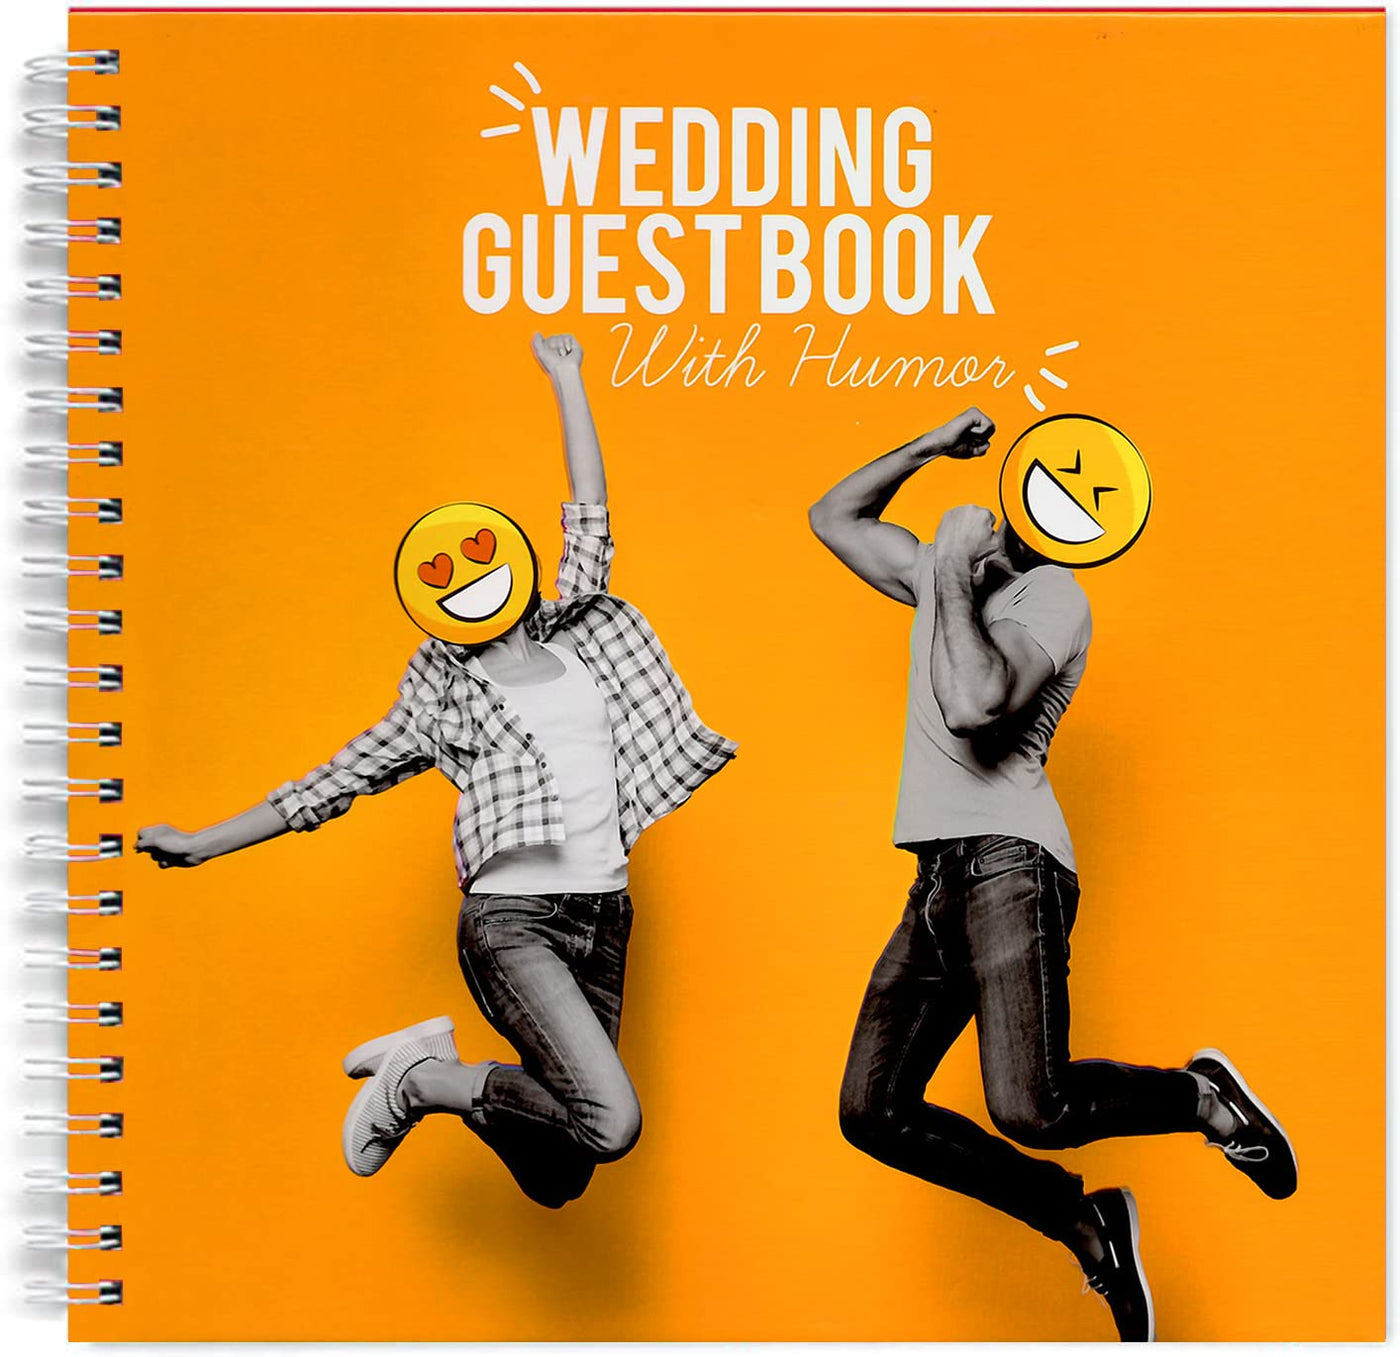 Wedding Guest Book -With Humor Funny Wedding Guest Book -8 x 8" Creative Wedding & Marriage Themed Guestbook -Keepsake Gift for the Bride & Groom. Perfect for Wedding-Anniversary-Special Occasions!